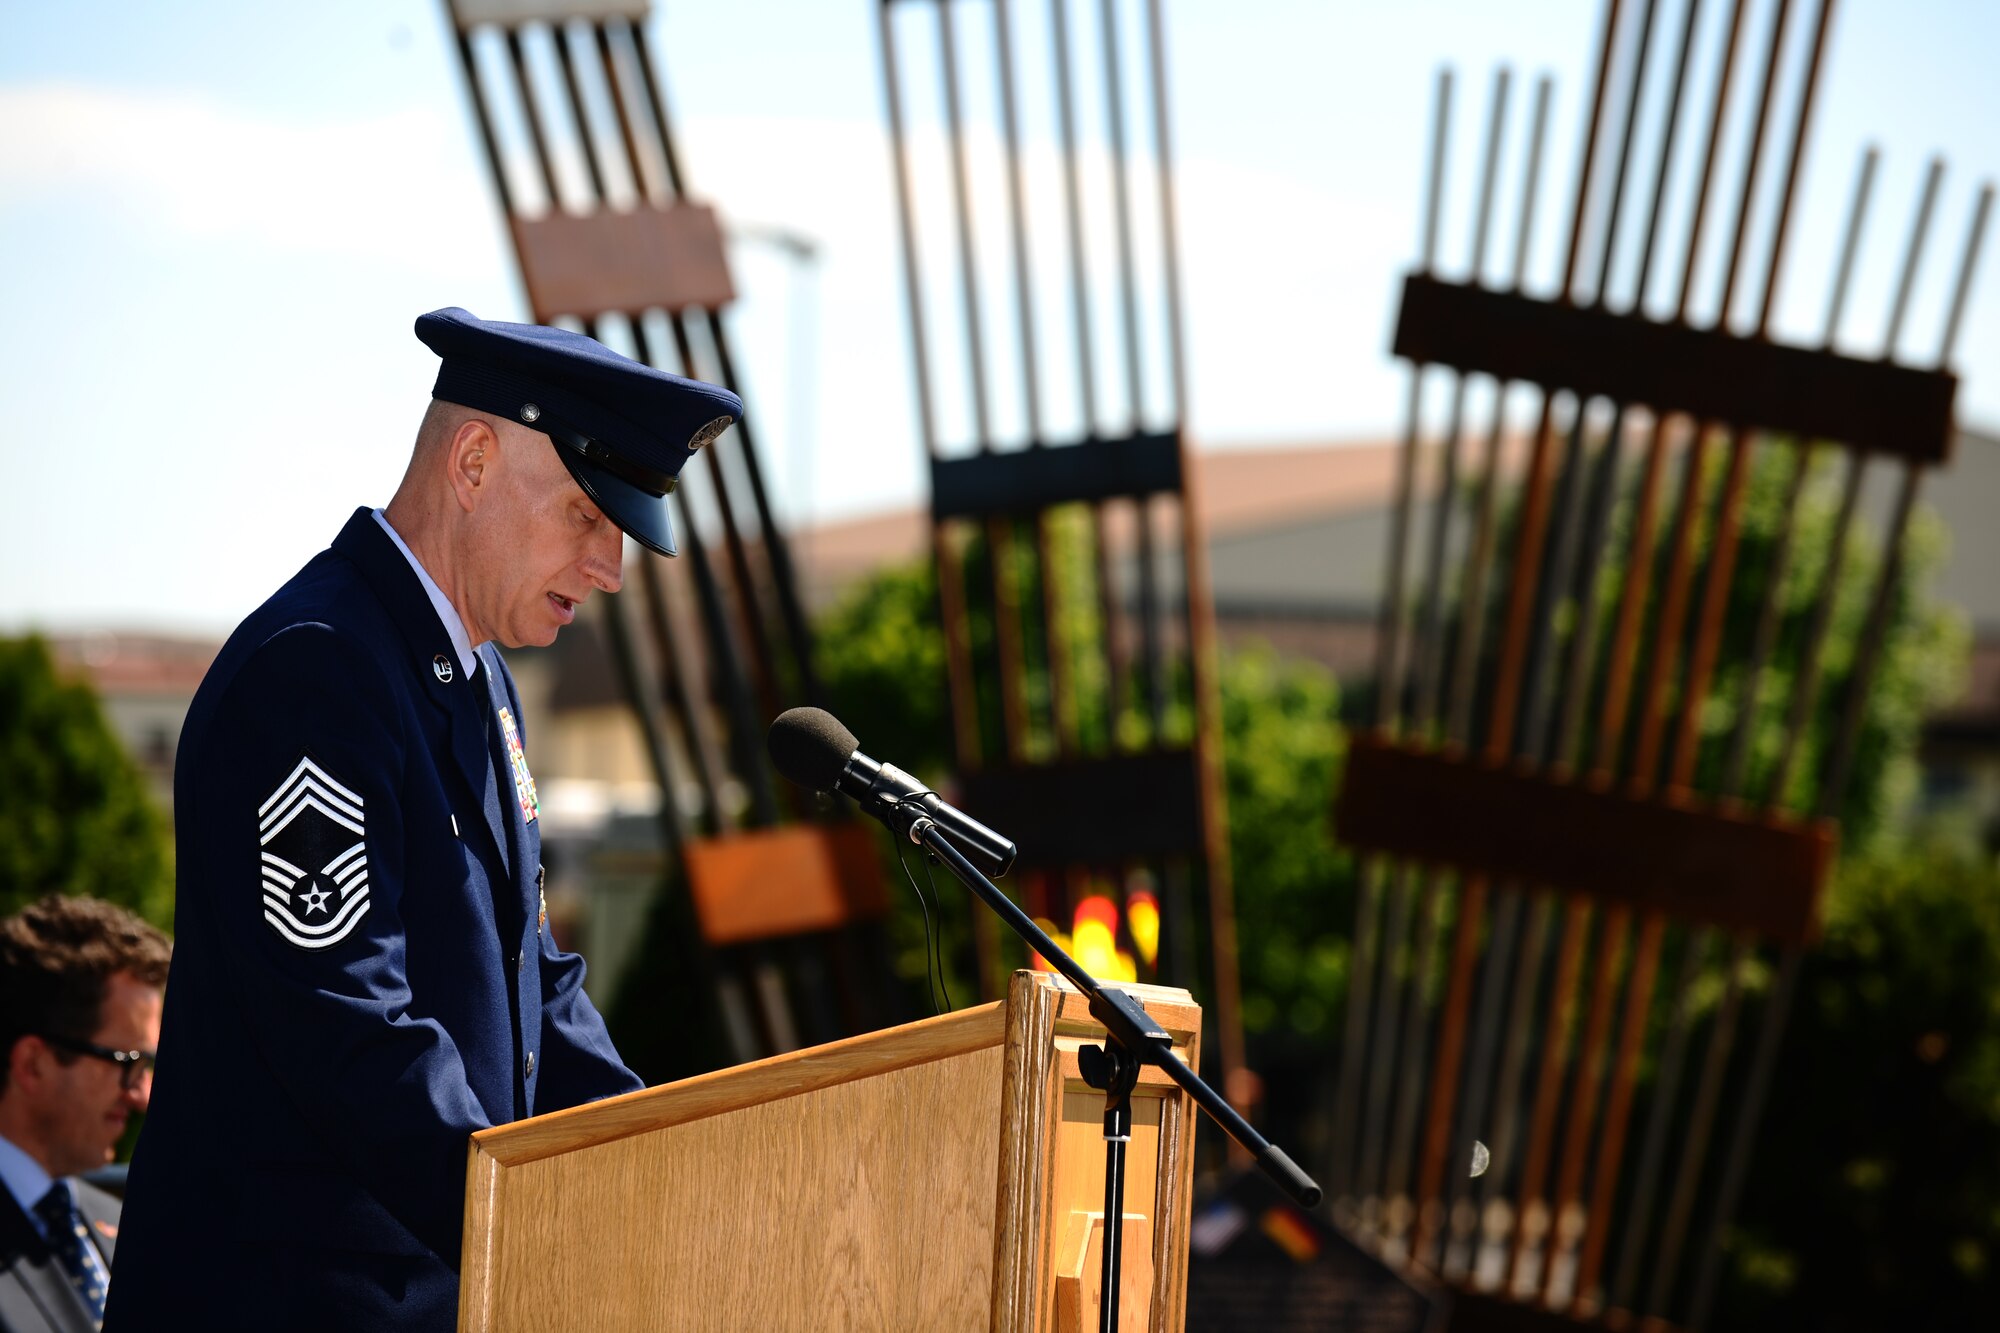 SPANGDAHLEM AIR BASE, Germany – Chief Master Sgt. Richard Lien, 52nd Civil Engineer Squadron fire chief, speaks during the 9/11 memorial dedication and wreath-laying ceremony here May 25. The 9/11 memorial was donated to the 52nd Fighter Wing by the Host Nation Council Spangdahlem and local businesses.  The sculpture was designed by Hubert Kruft, artist, from Niederpruem. (U.S. Air Force photo by Airman 1st Class Matthew B. Fredericks/Released)